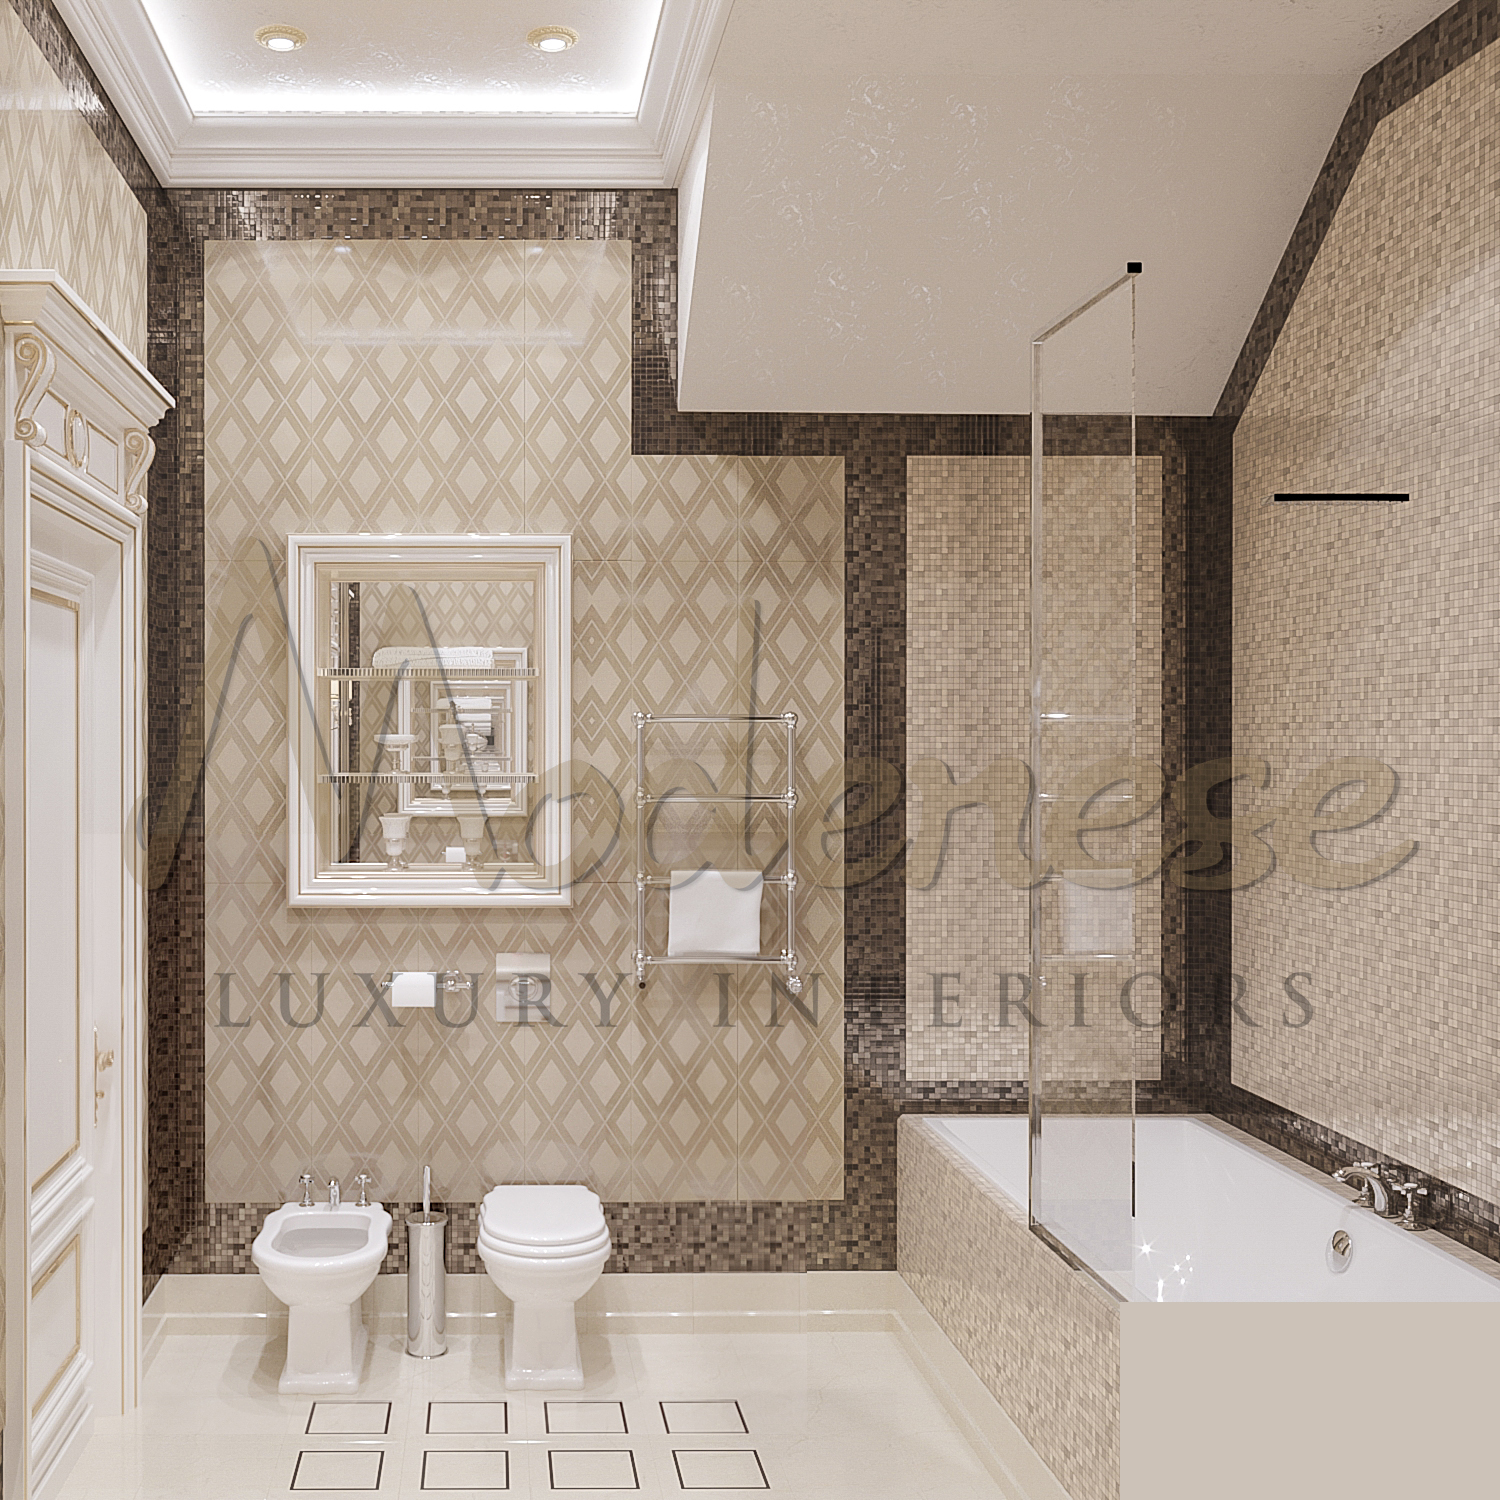 Luxurious interiors.Bespoke interior design project and furniture production made in Italy. Bathroom Interior Design Lahore.